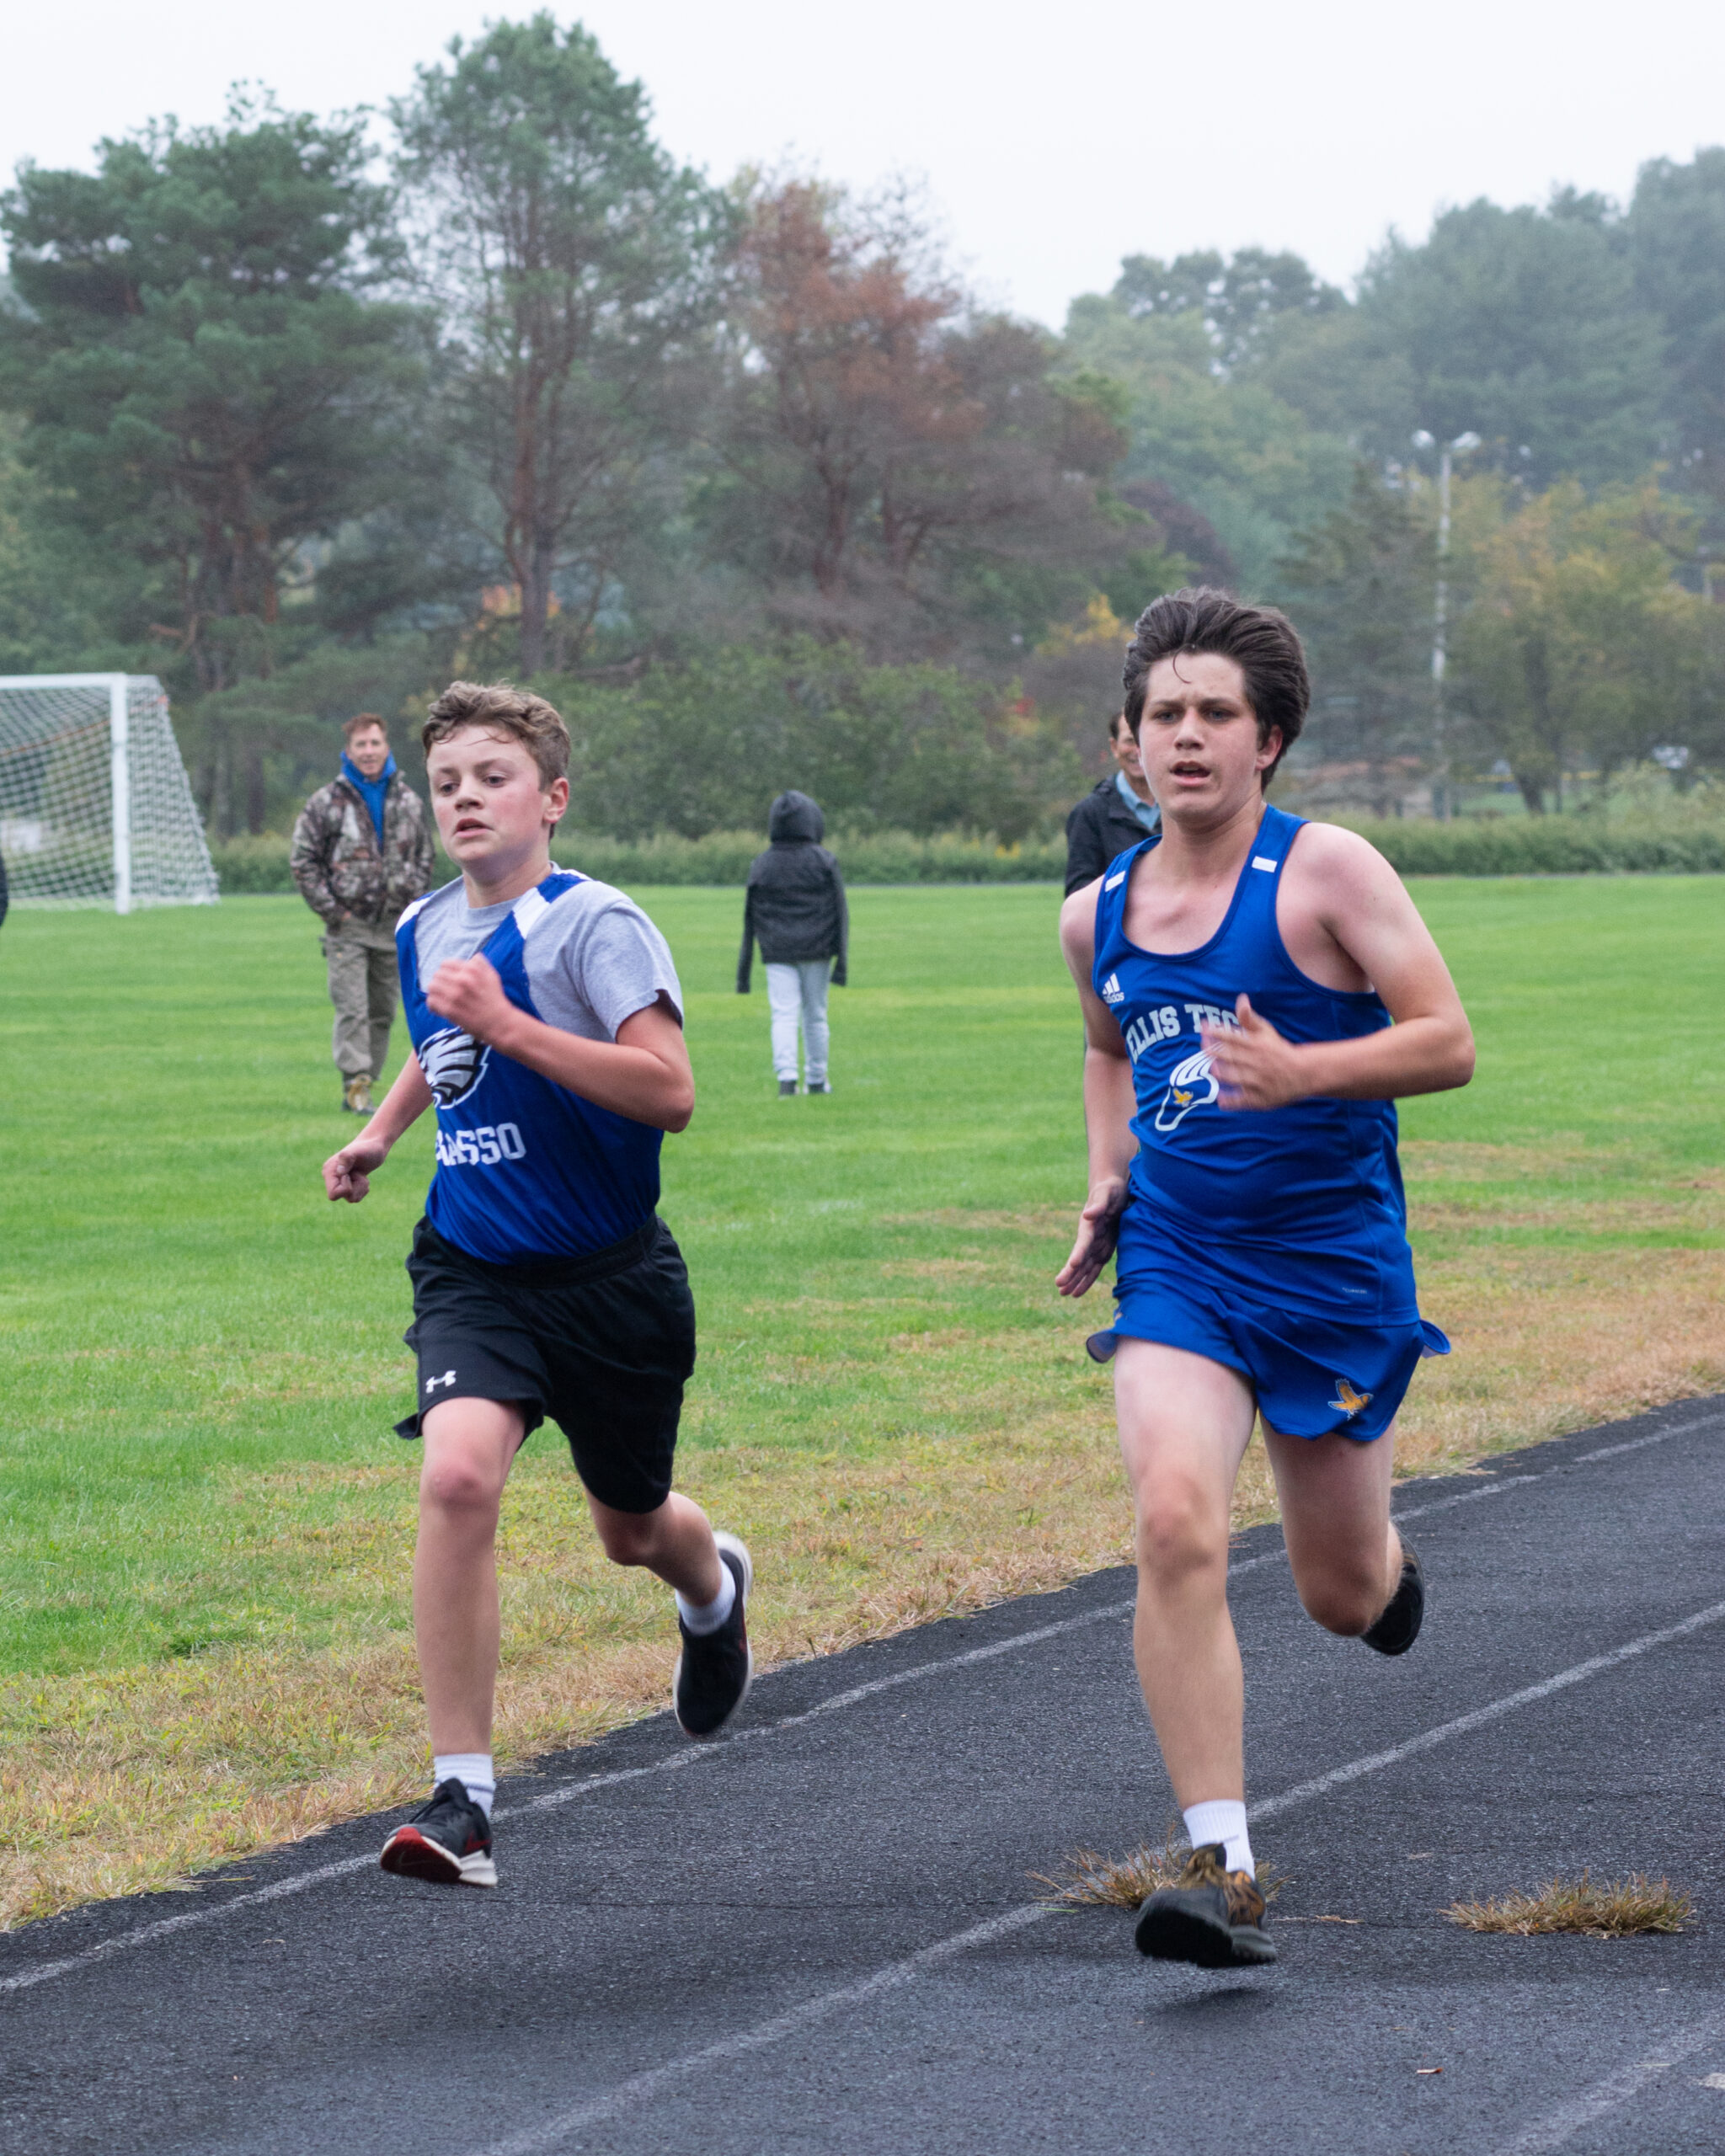 Action shot of runners taking part in a Grasso Tech boys' Cross Country meet.